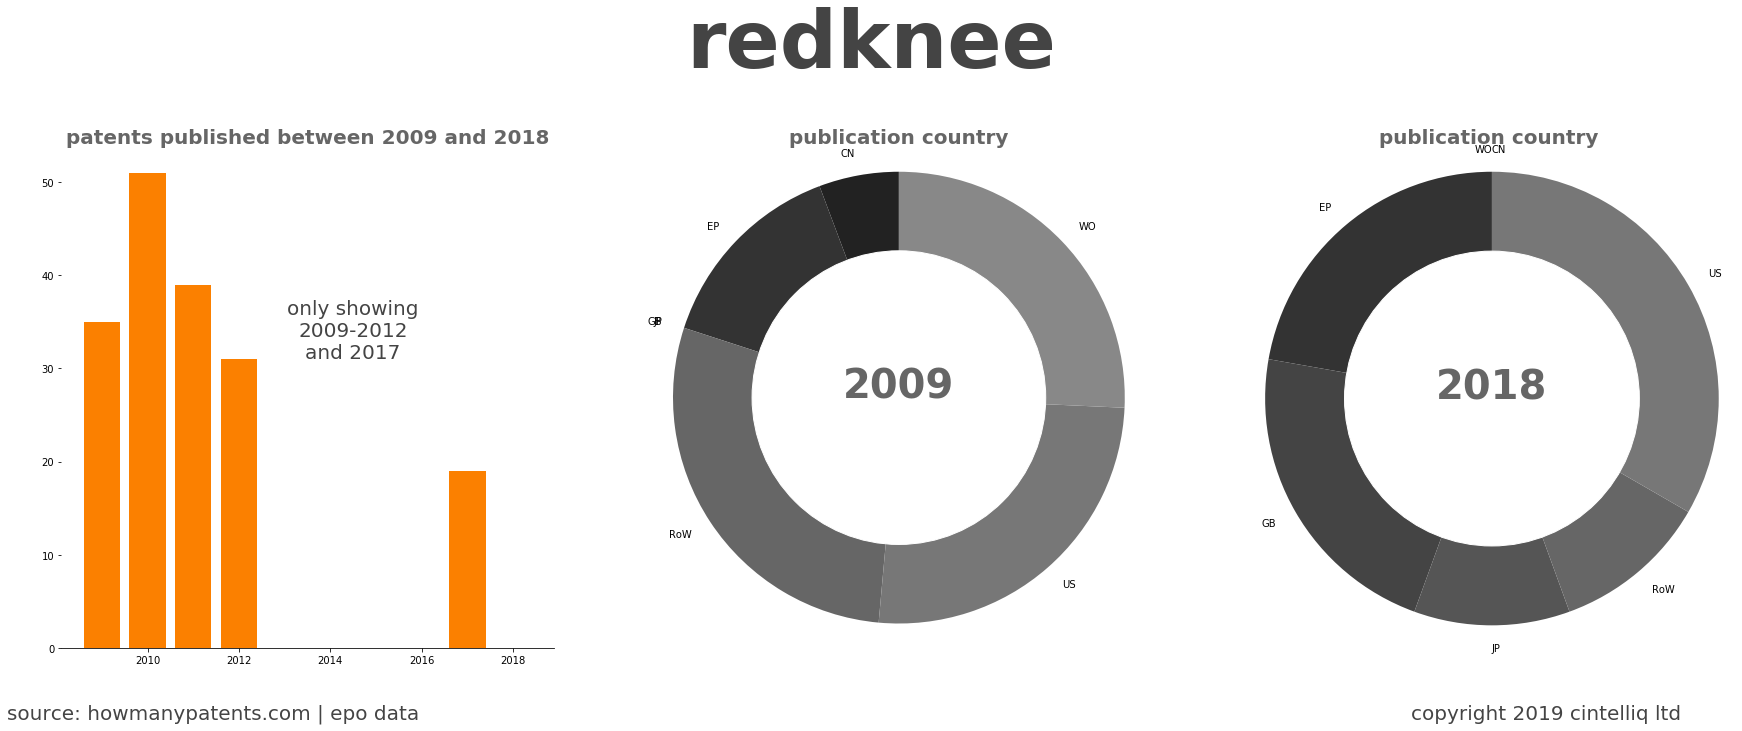 summary of patents for Redknee